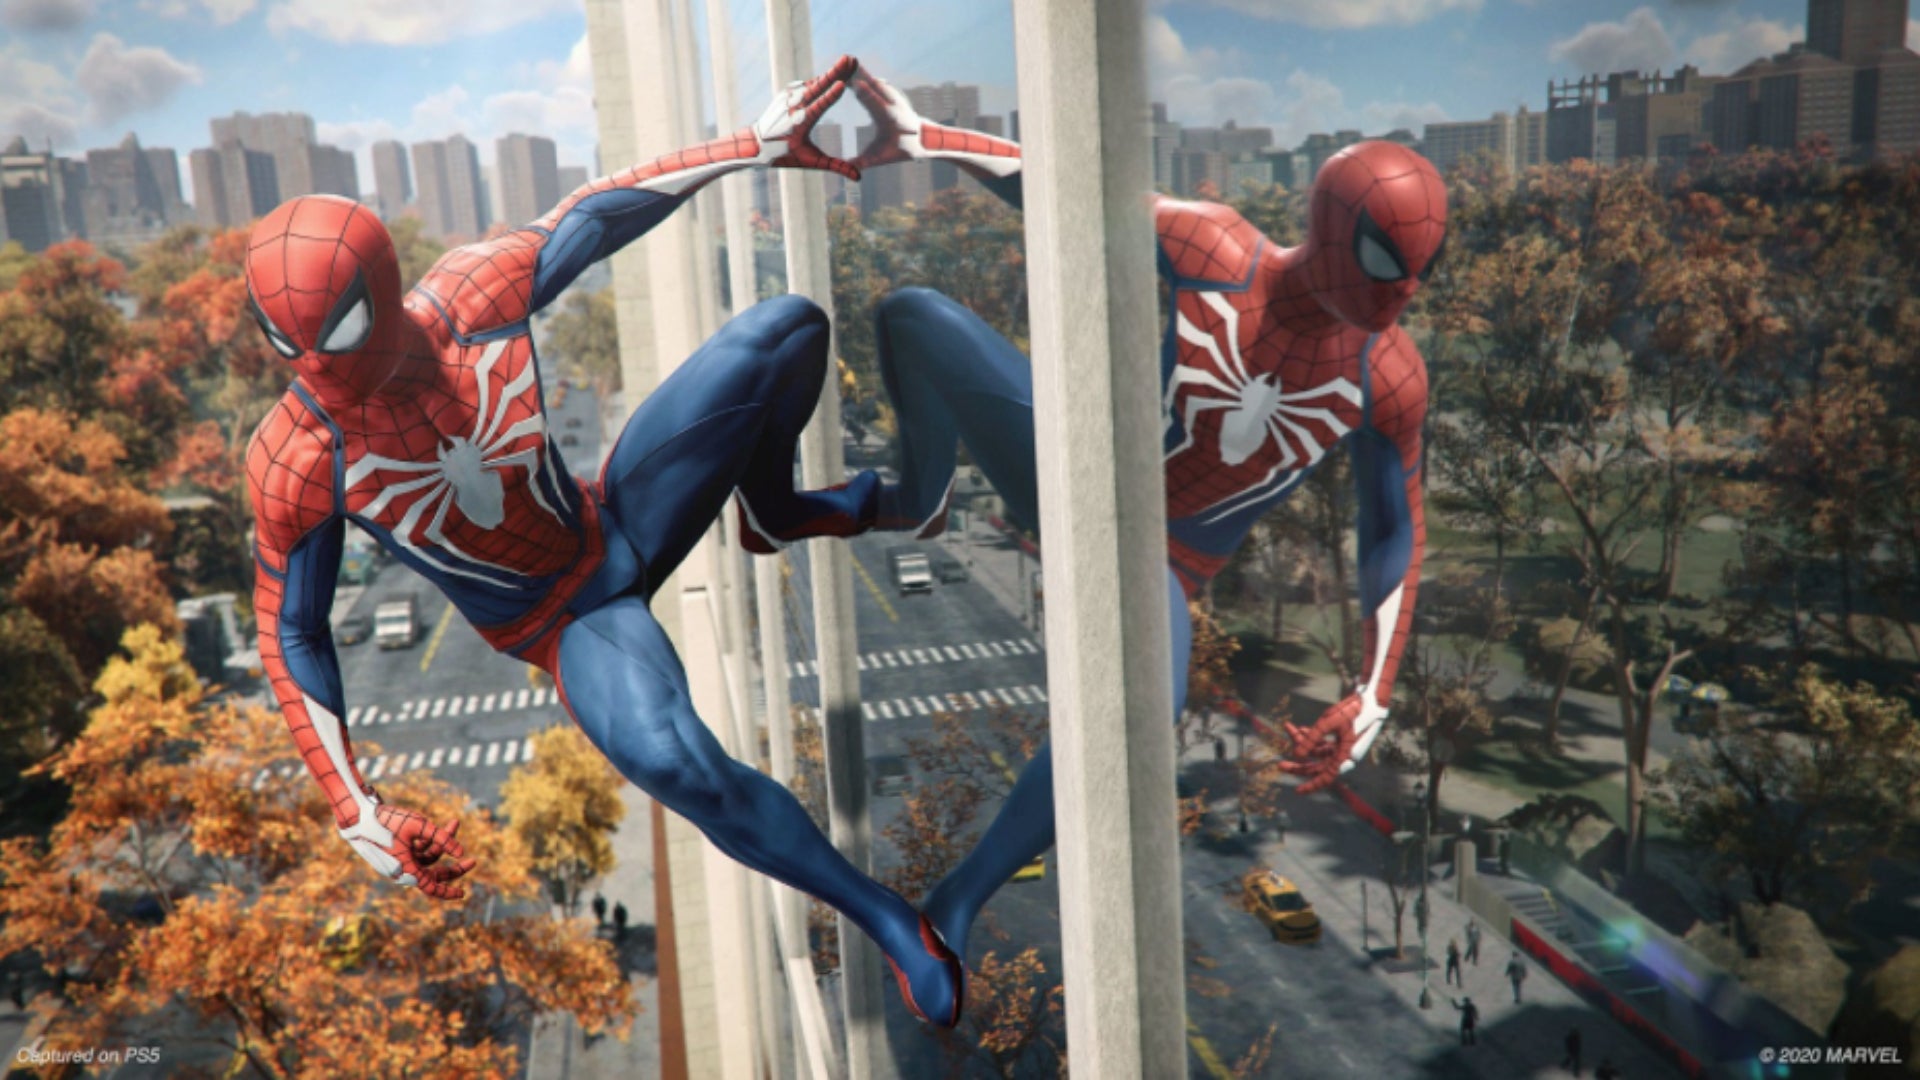 Spider-Man PC files reveal that co-op and PvP were once being developed